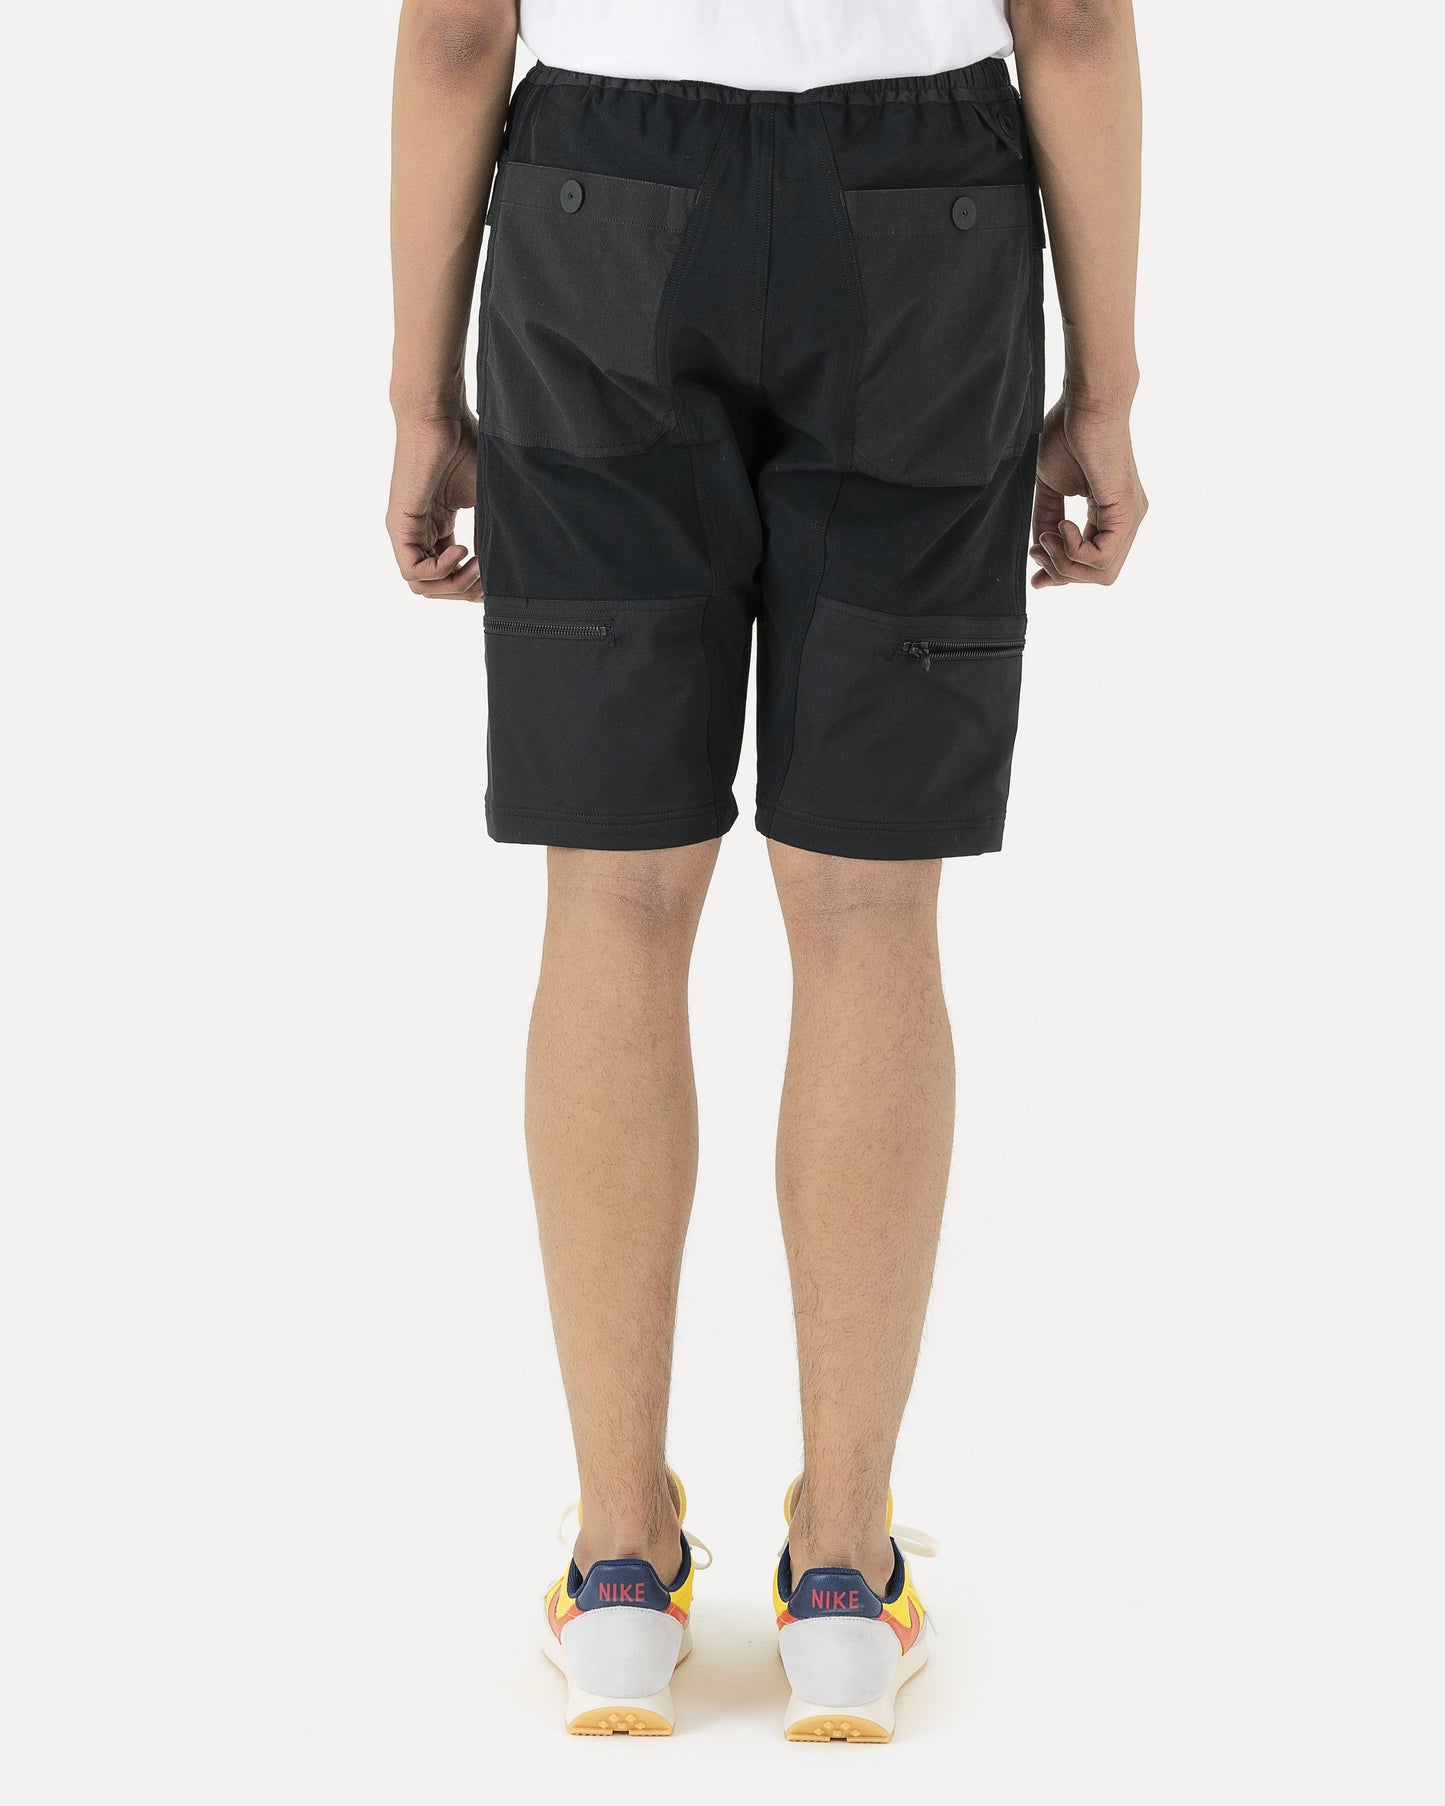 White Mountaineering Men's Shorts Military Shorts in Black